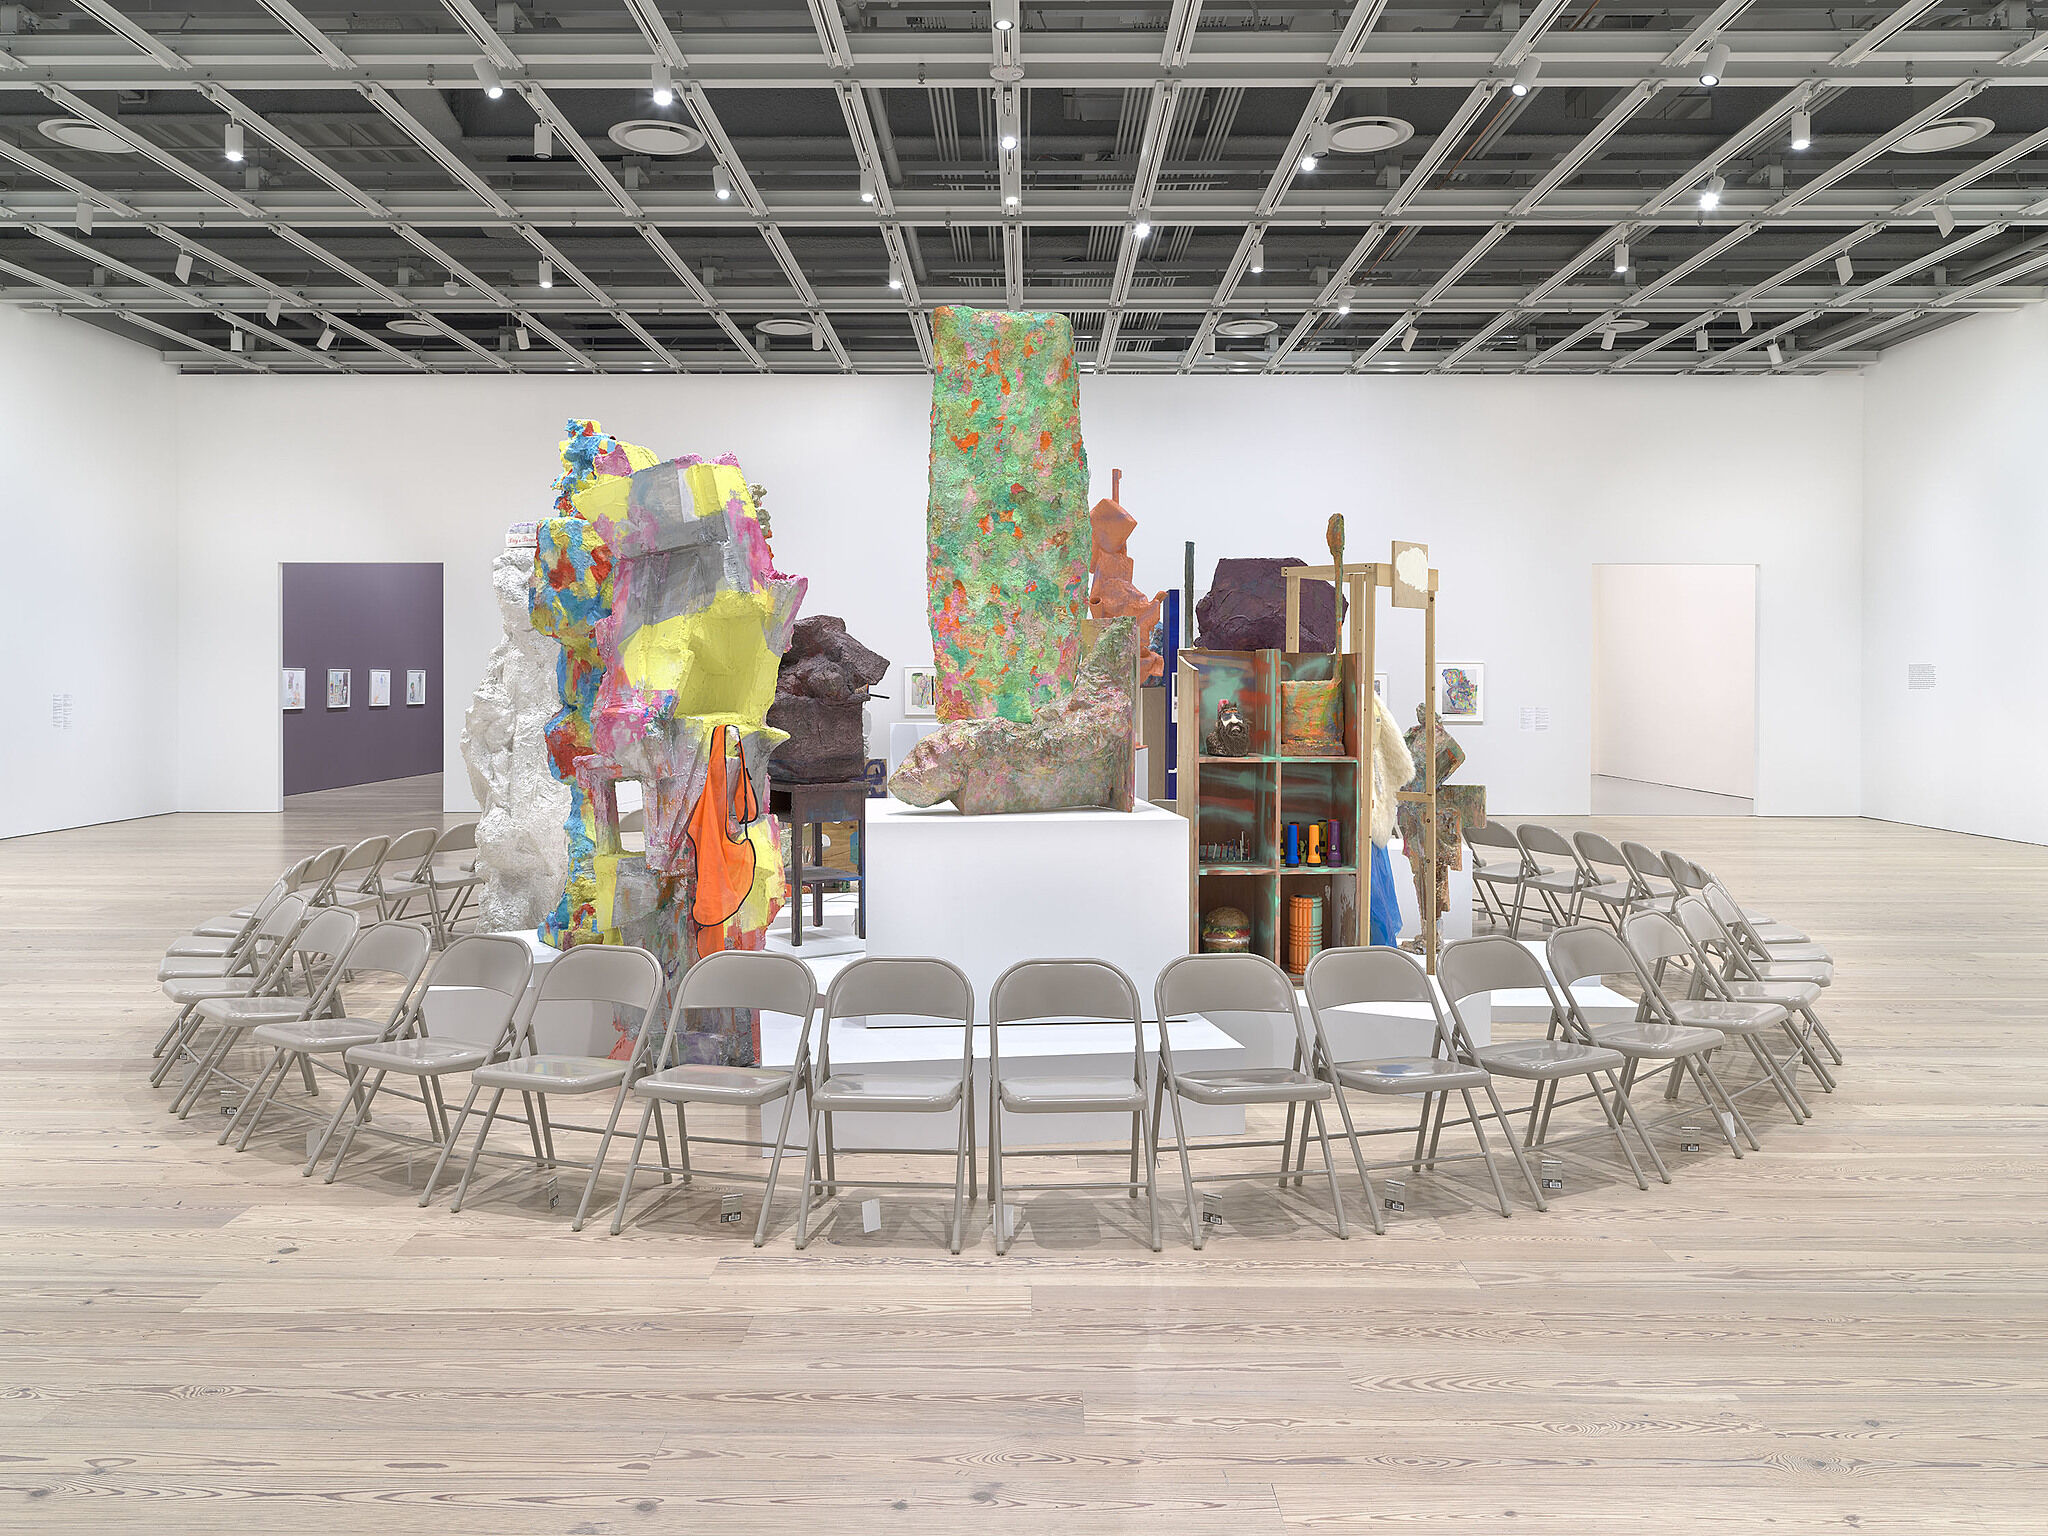 A ring of chairs surround various sculptures in a gallery.